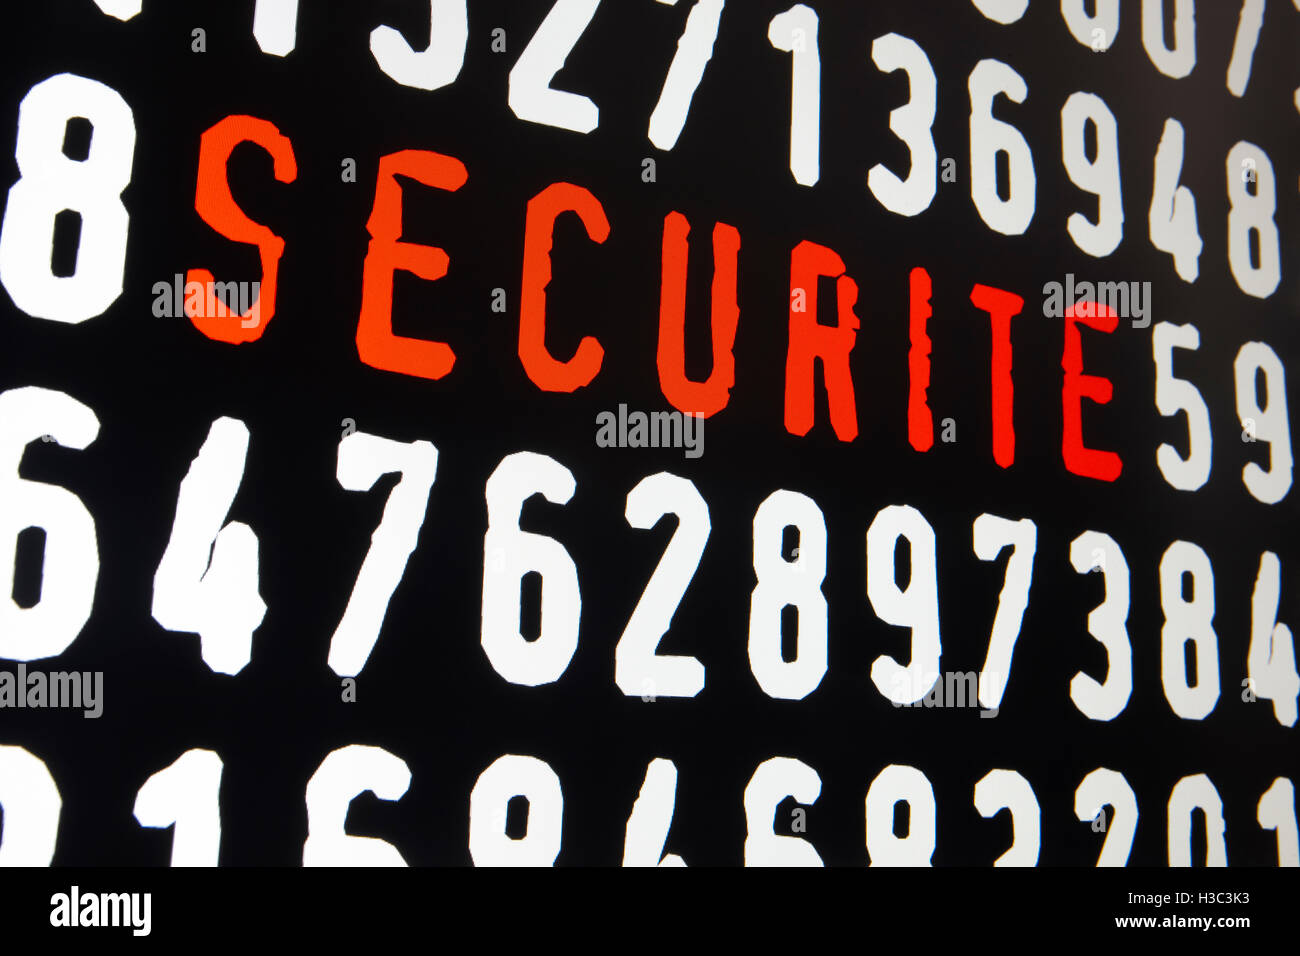 Computer screen with securite text on black background. Horizontal Stock Photo